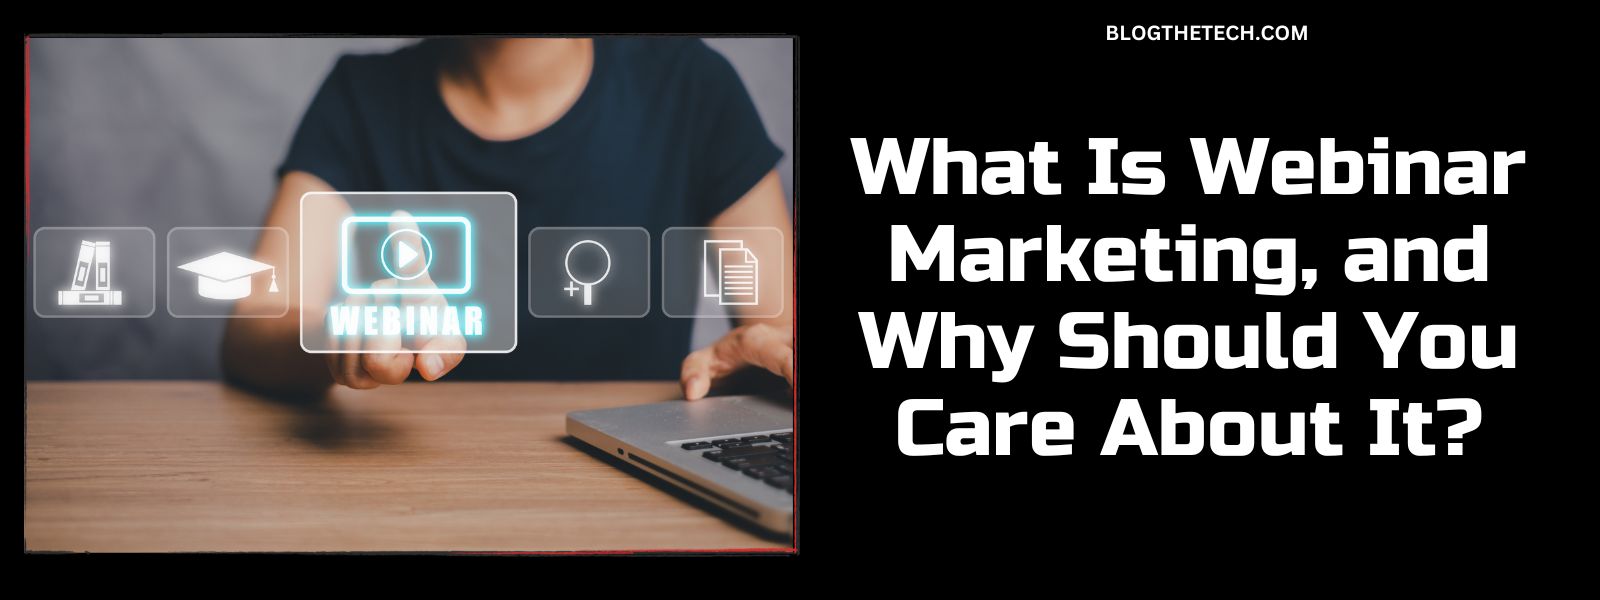 What Is Webinar Marketing, and Why Should You Care About It?